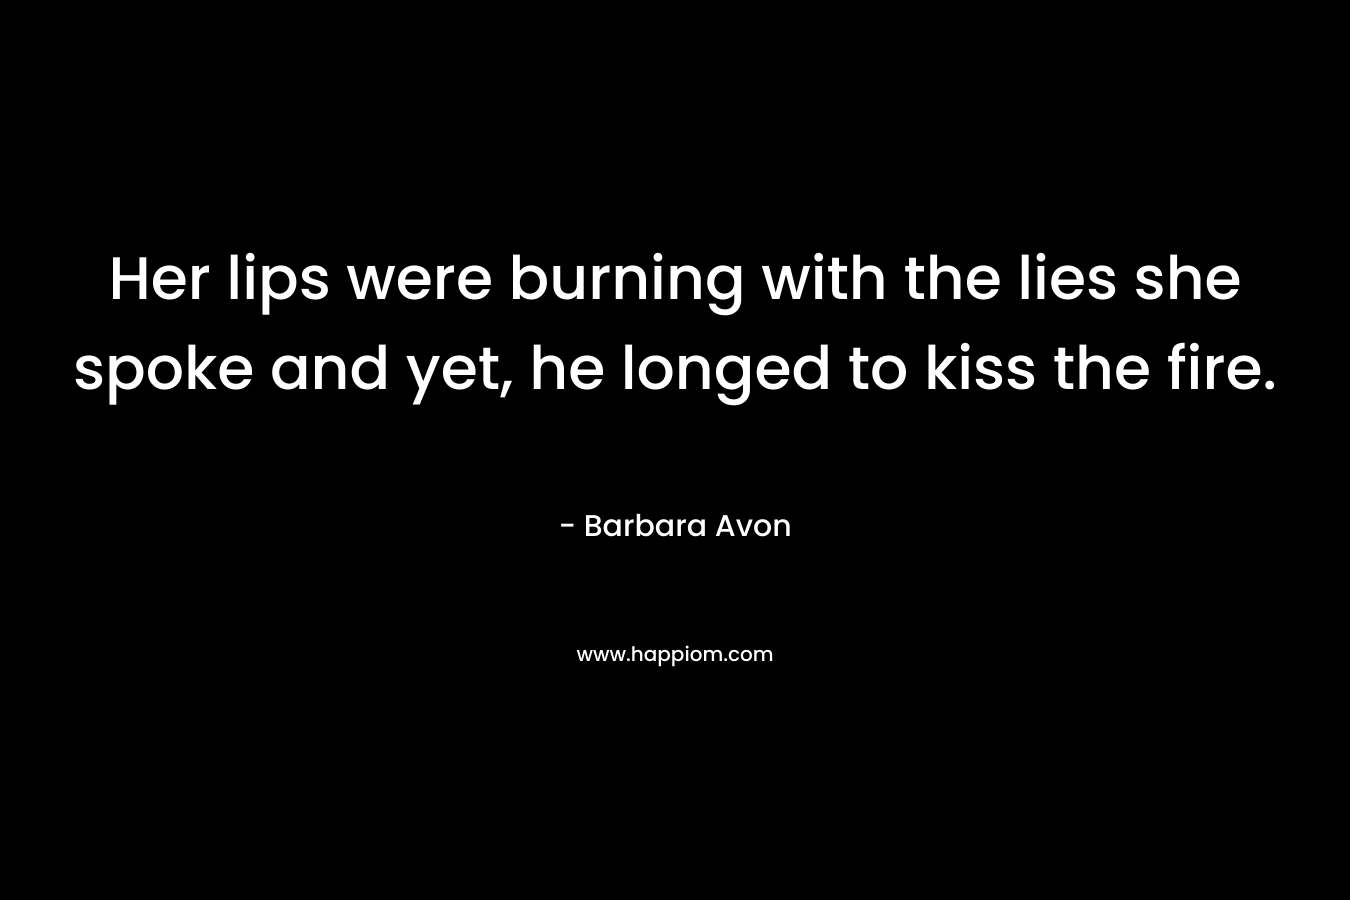 Her lips were burning with the lies she spoke and yet, he longed to kiss the fire. – Barbara Avon